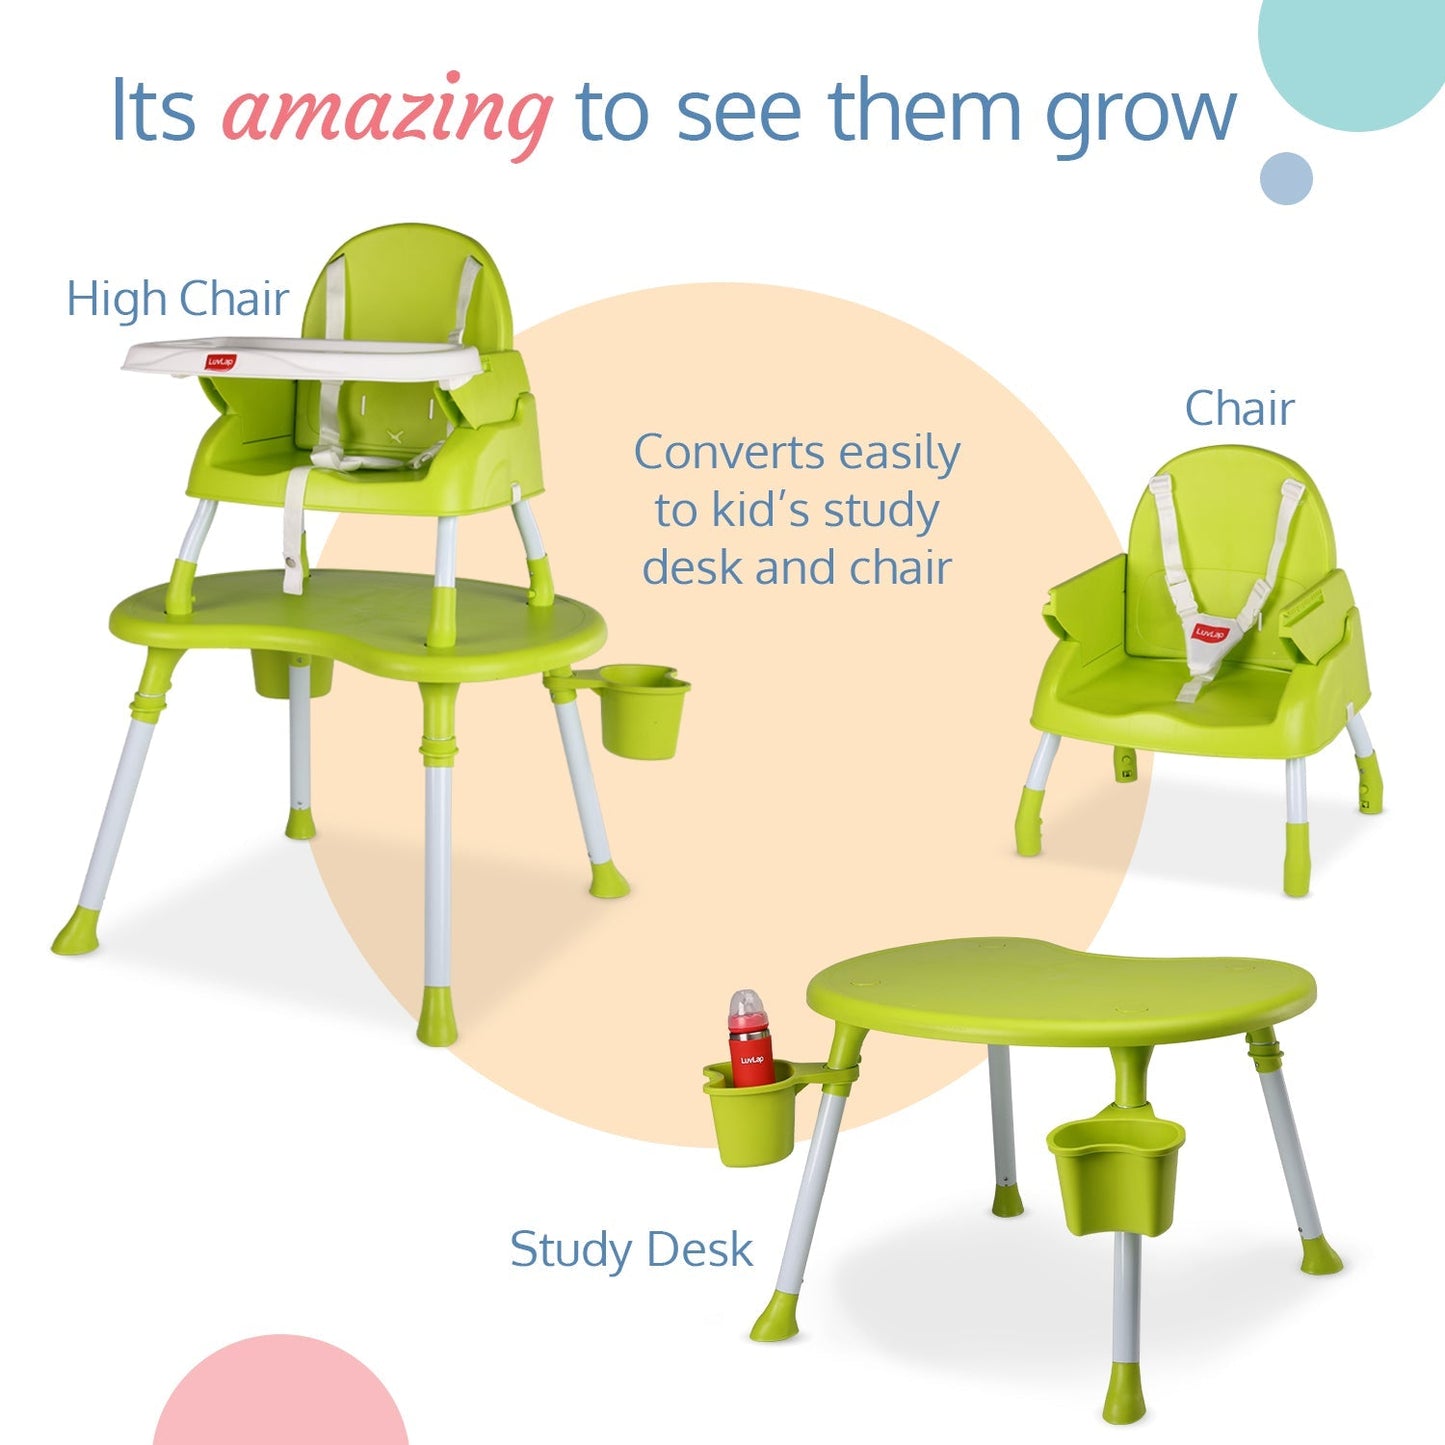 4 In 1 Convertible Baby High Chair , Green